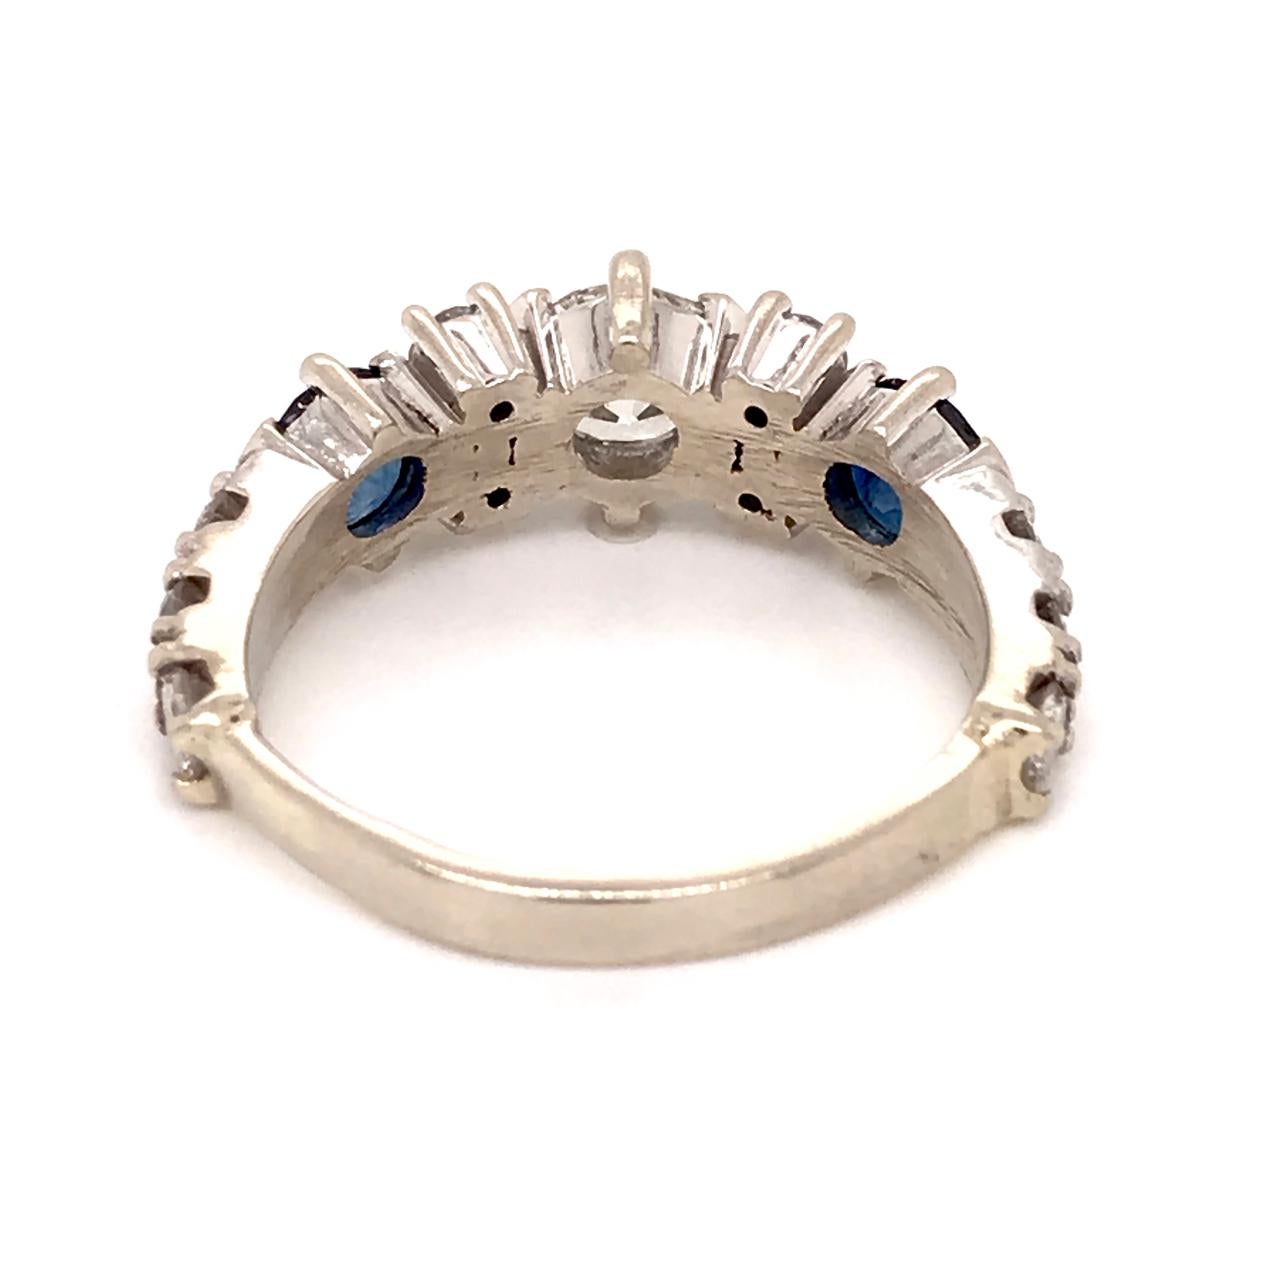 Vintage 14k White Gold, Diamond, & Sapphire Art Deco Style Cocktail Ring For Sale 2